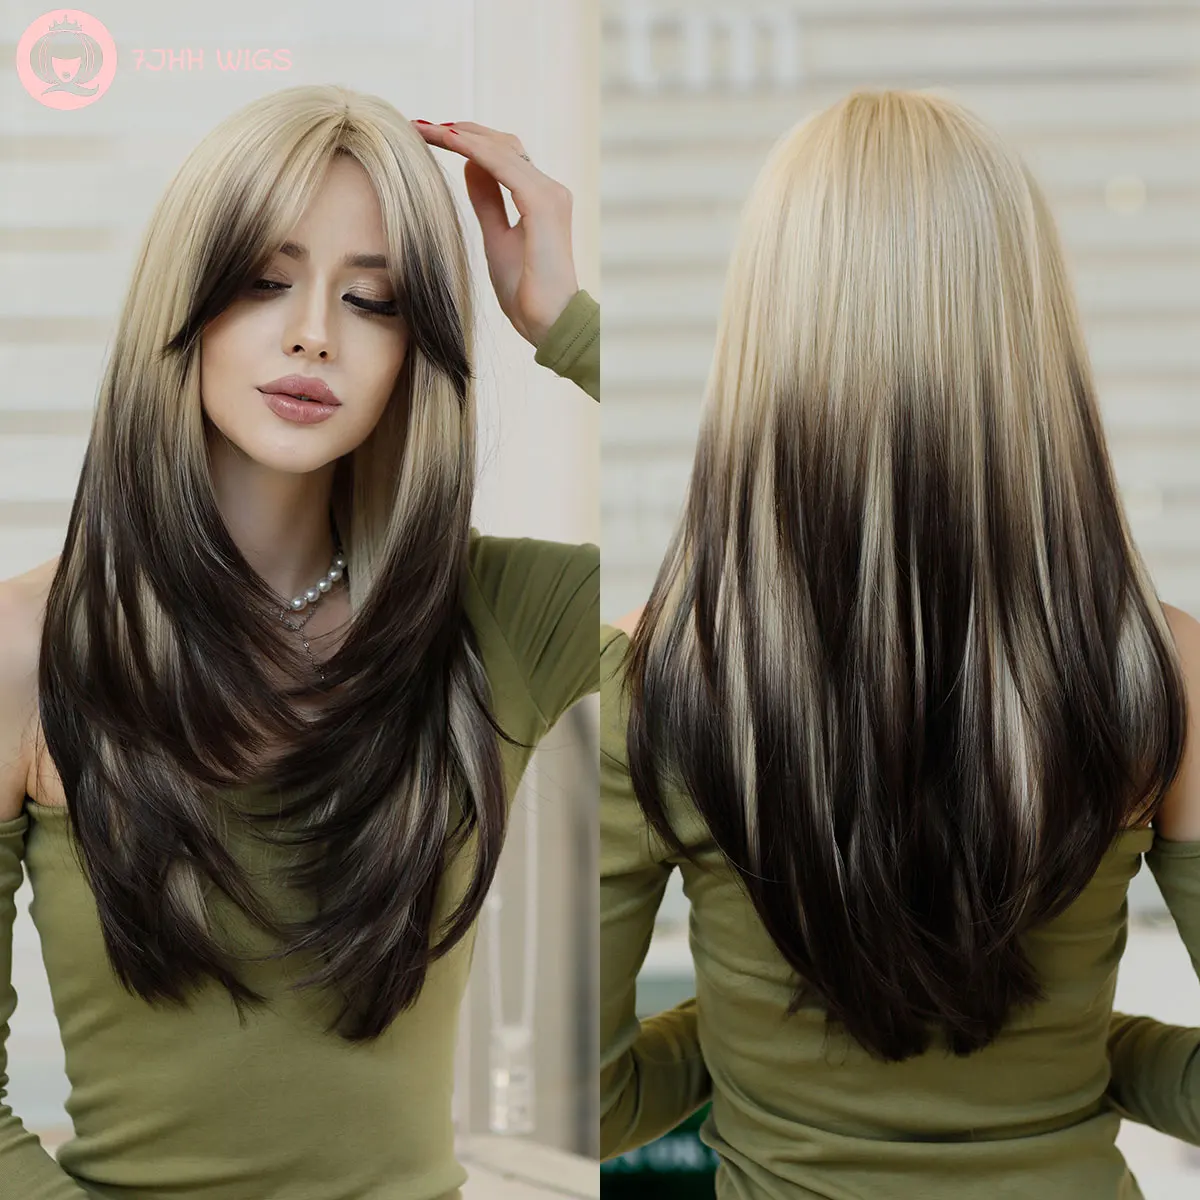 7JHH WIGS Ombre Blonde Wig for Women Long Wavy Lavender Wig with Bangs Natural Synthetic Hai Wig for Cosplay Heat Resistant